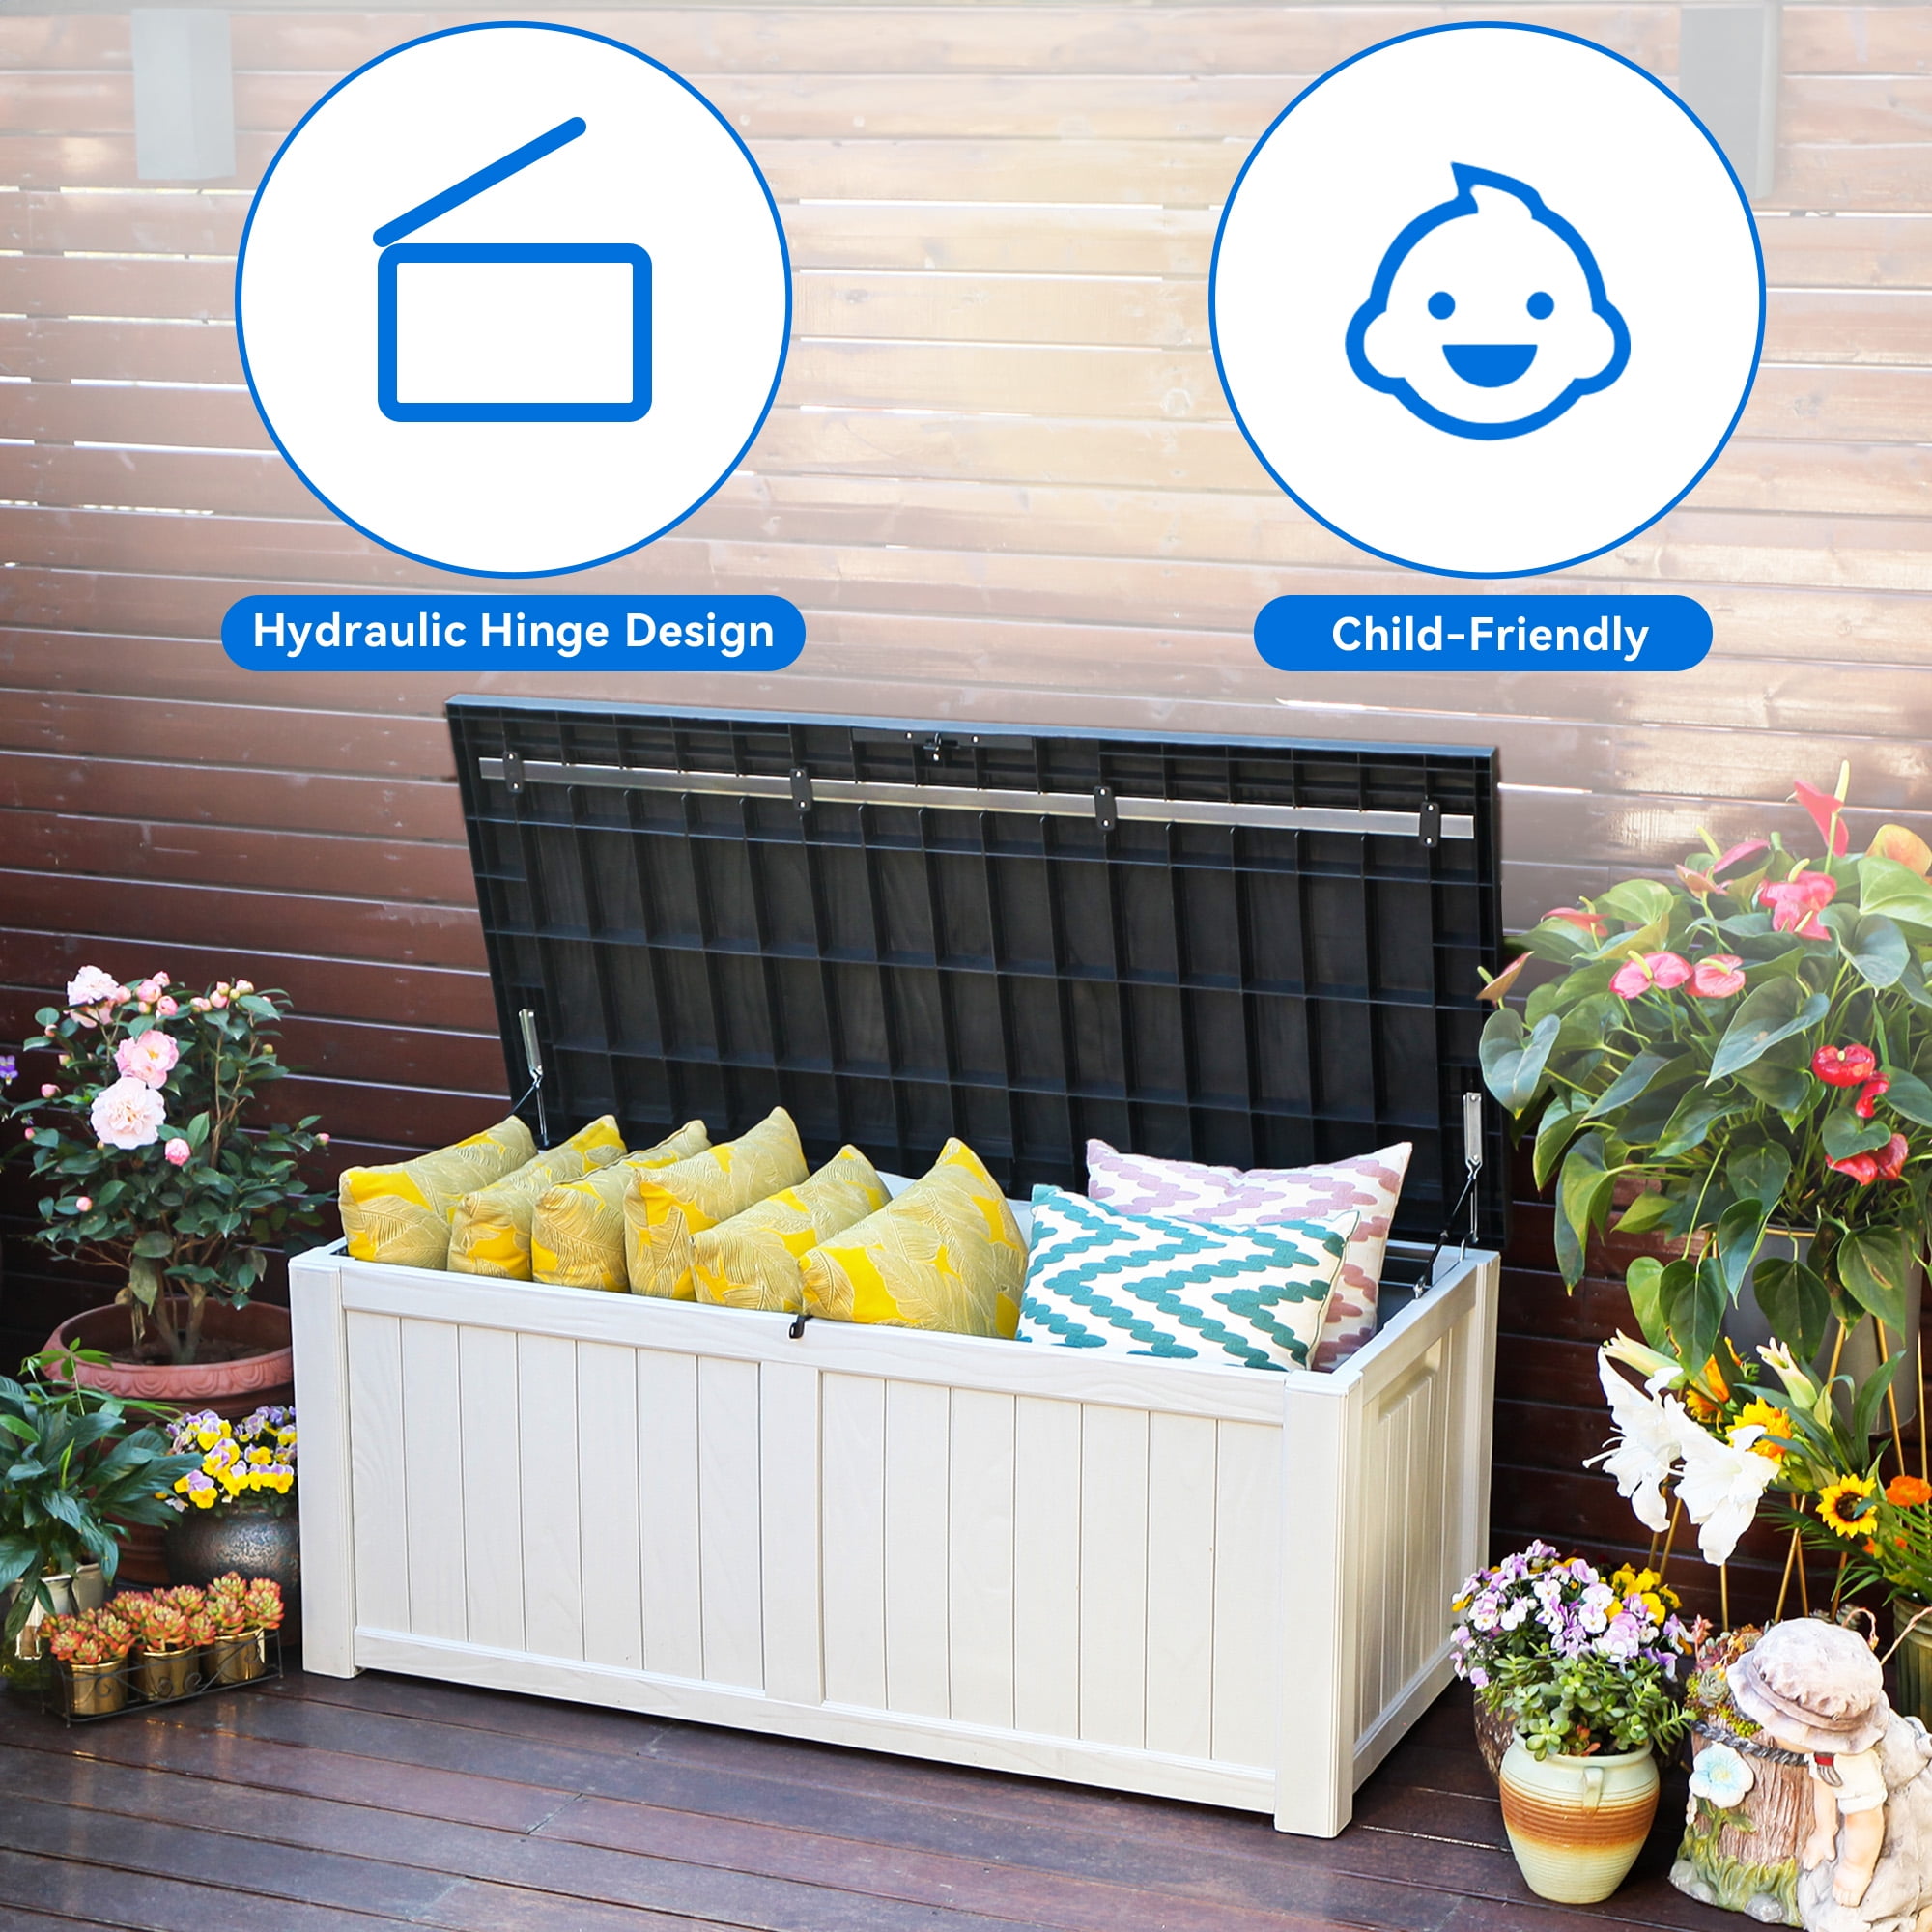 SereneLifeHome 120-Gallon Deck Storage Box - Waterproof Outdoor Large  Resin,Garden Tools, Patio Furniture & Sports Equipment, Water-resistant